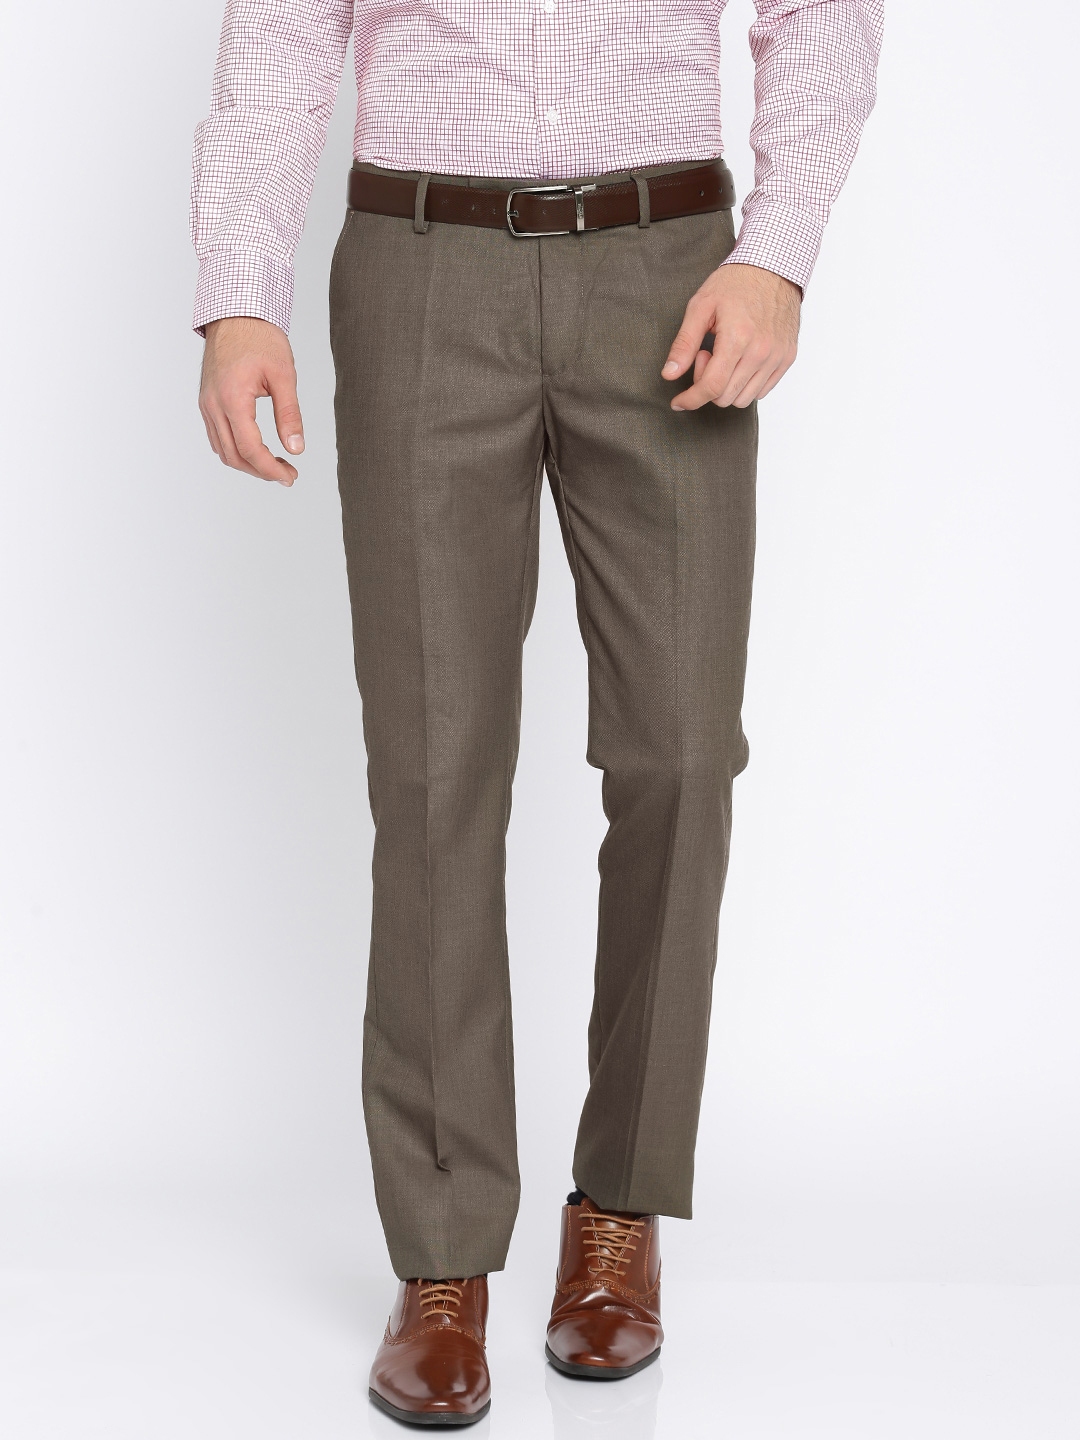 Cobb Brown Ultra Fit Formal Trouser  Premium Quality and Comfortable